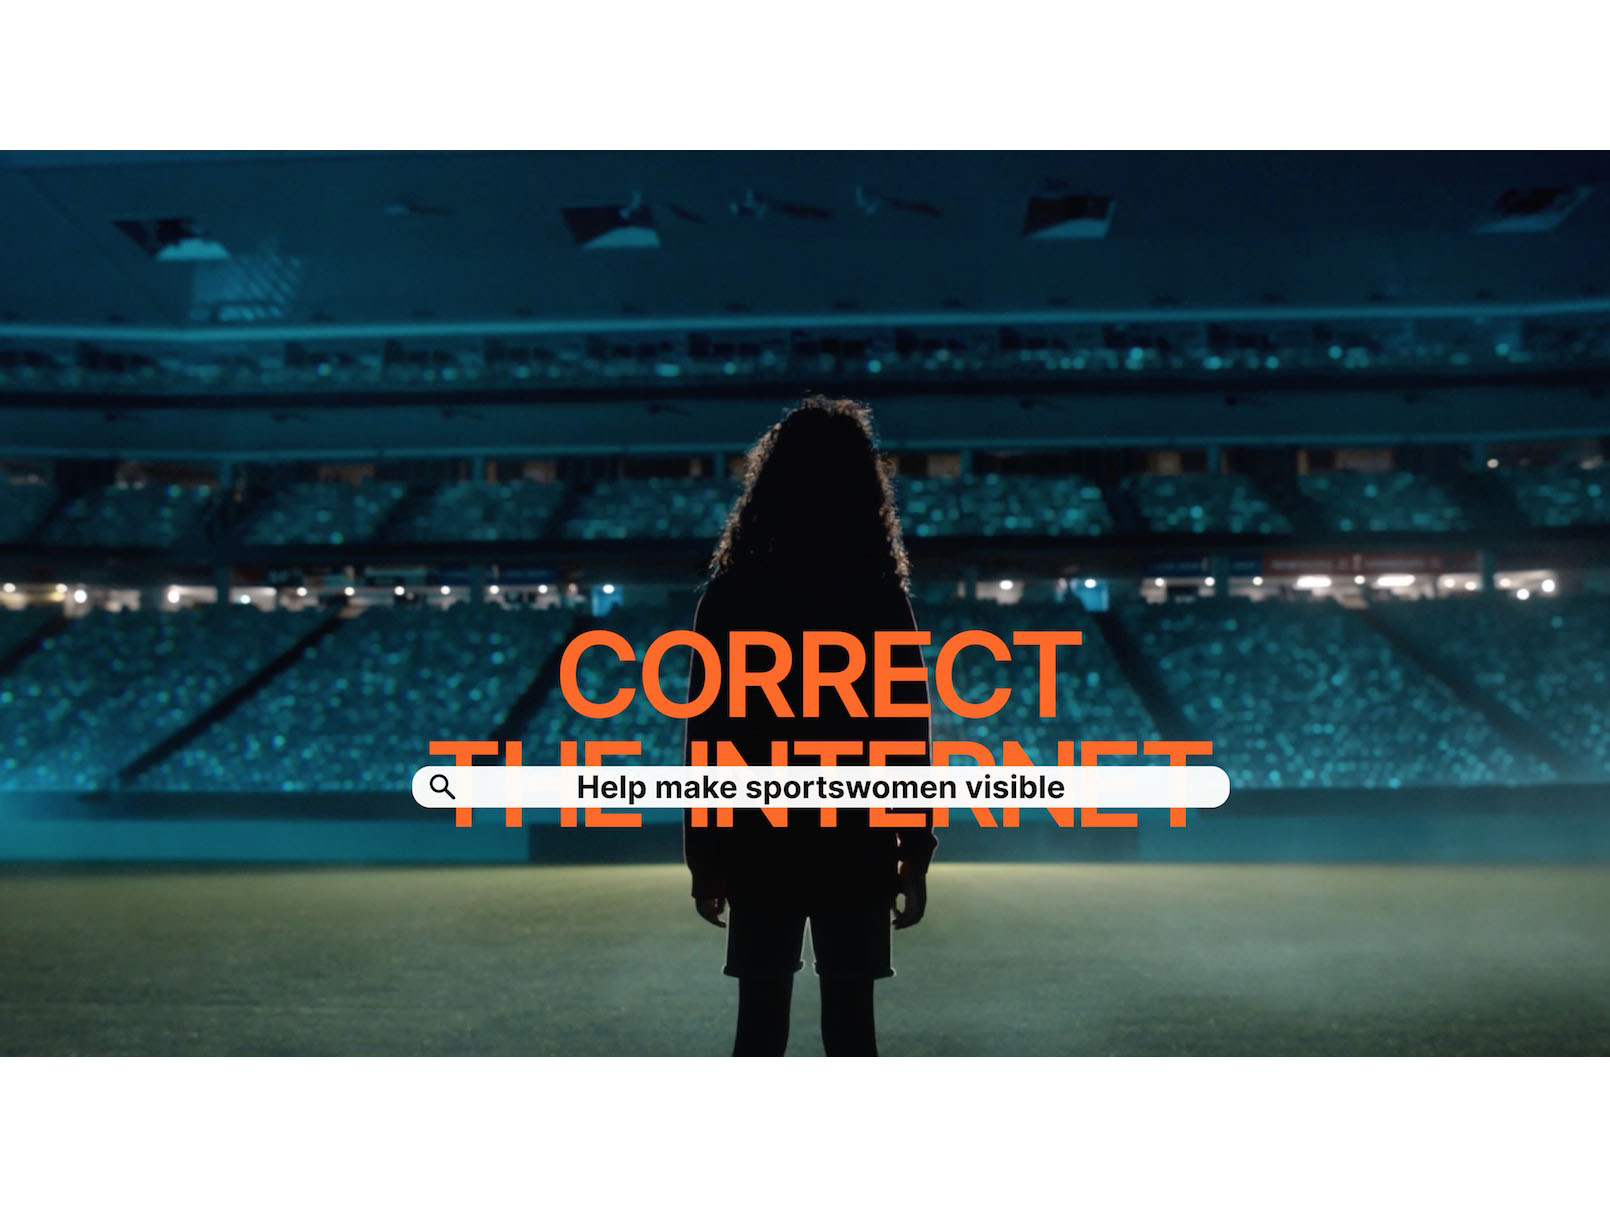 New global campaign wants to ‘correct the internet’ and make sportswomen more visible 